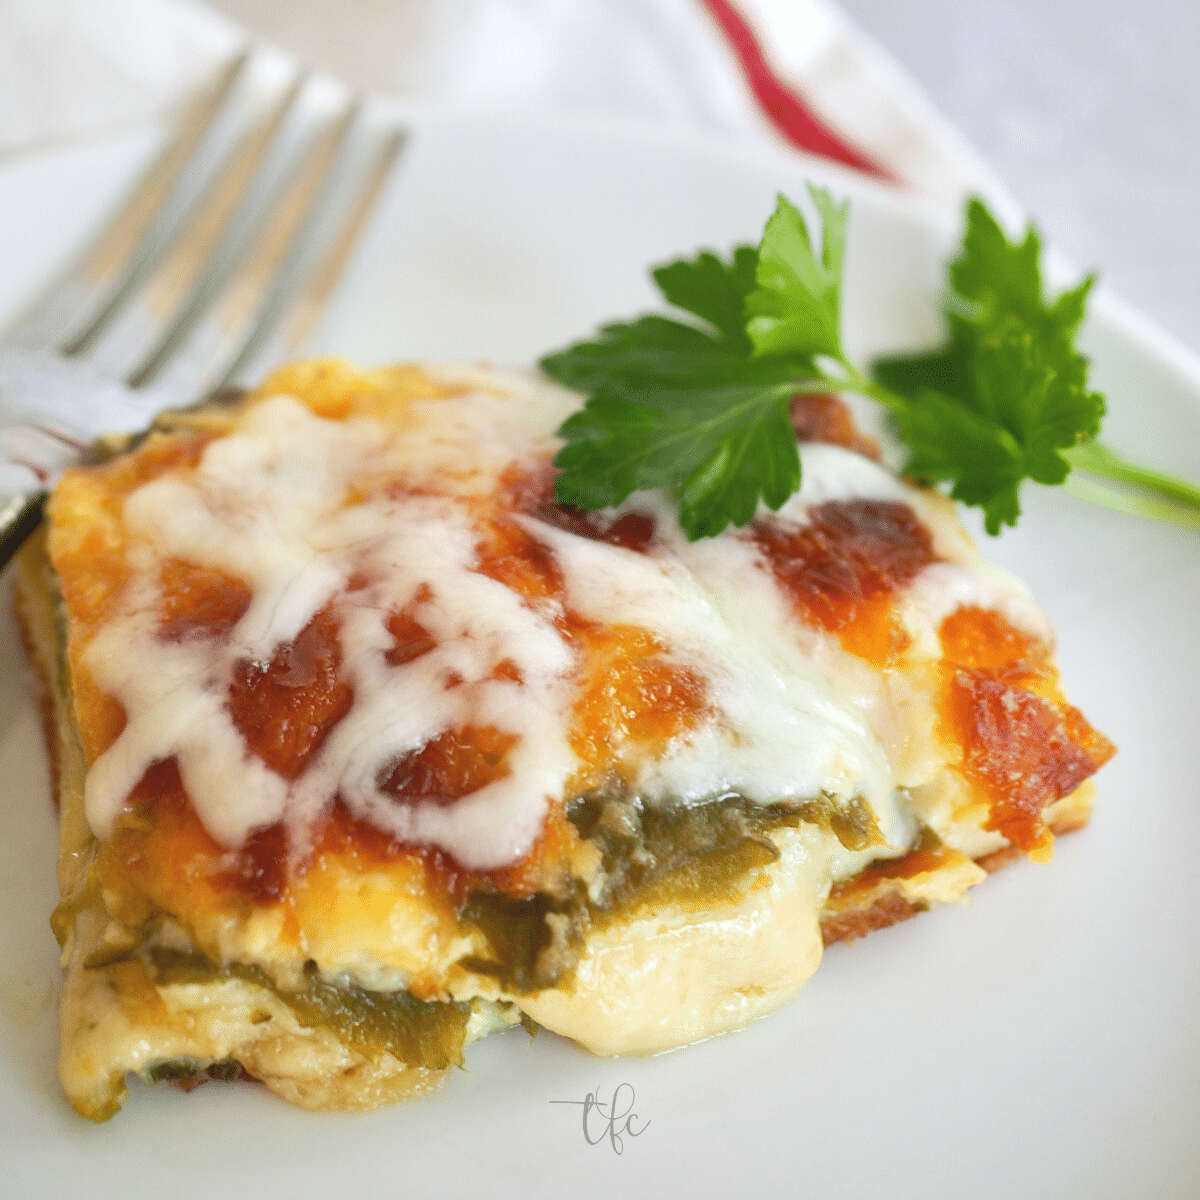 Square of chile relleno casserole on a plate with a fork and cheese oozing from chile.